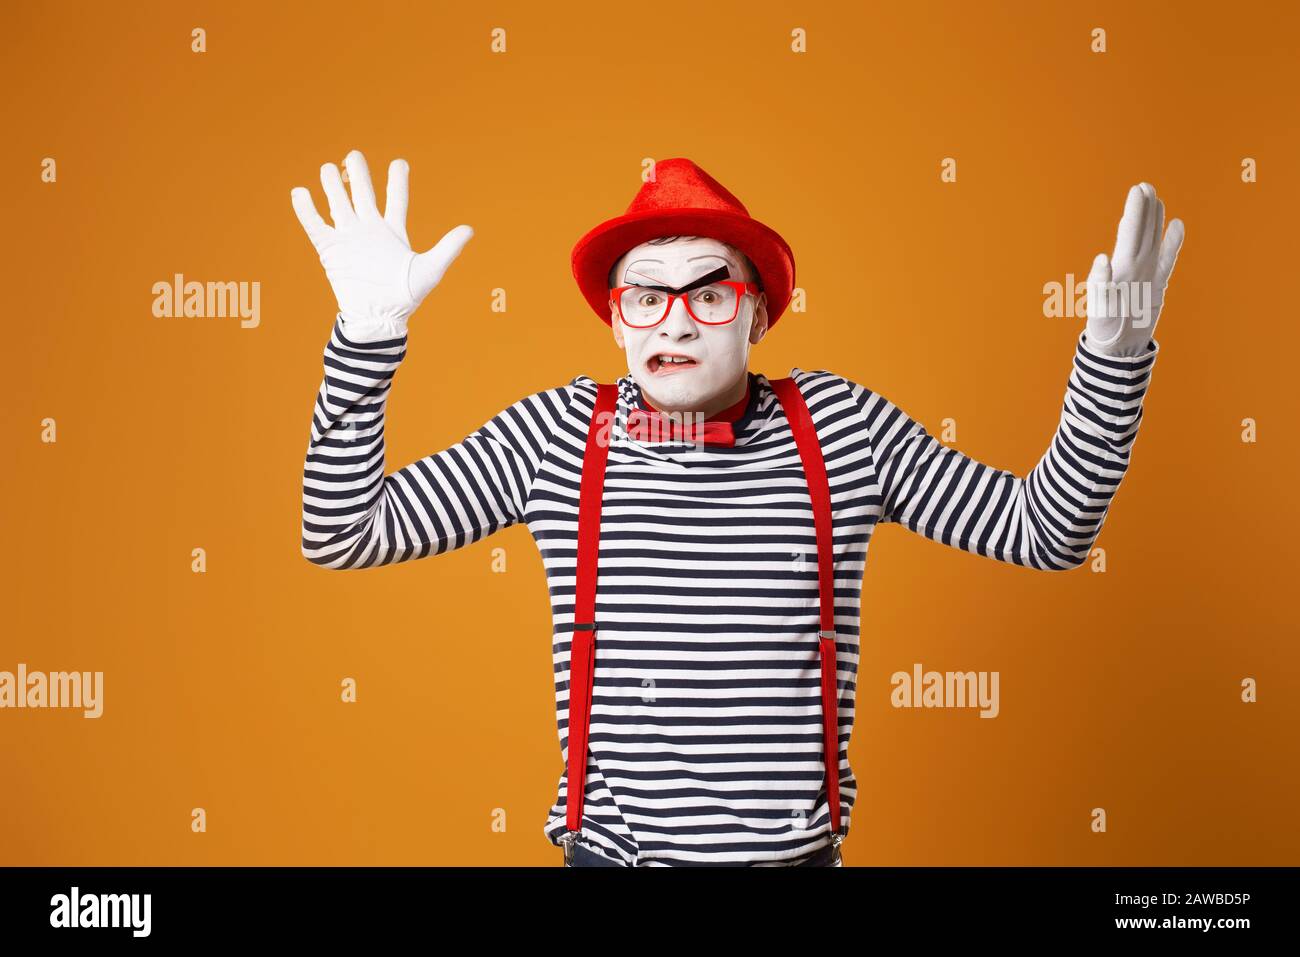 Sad mime clown in red hat and in vest with hands up on empty orange background Stock Photo